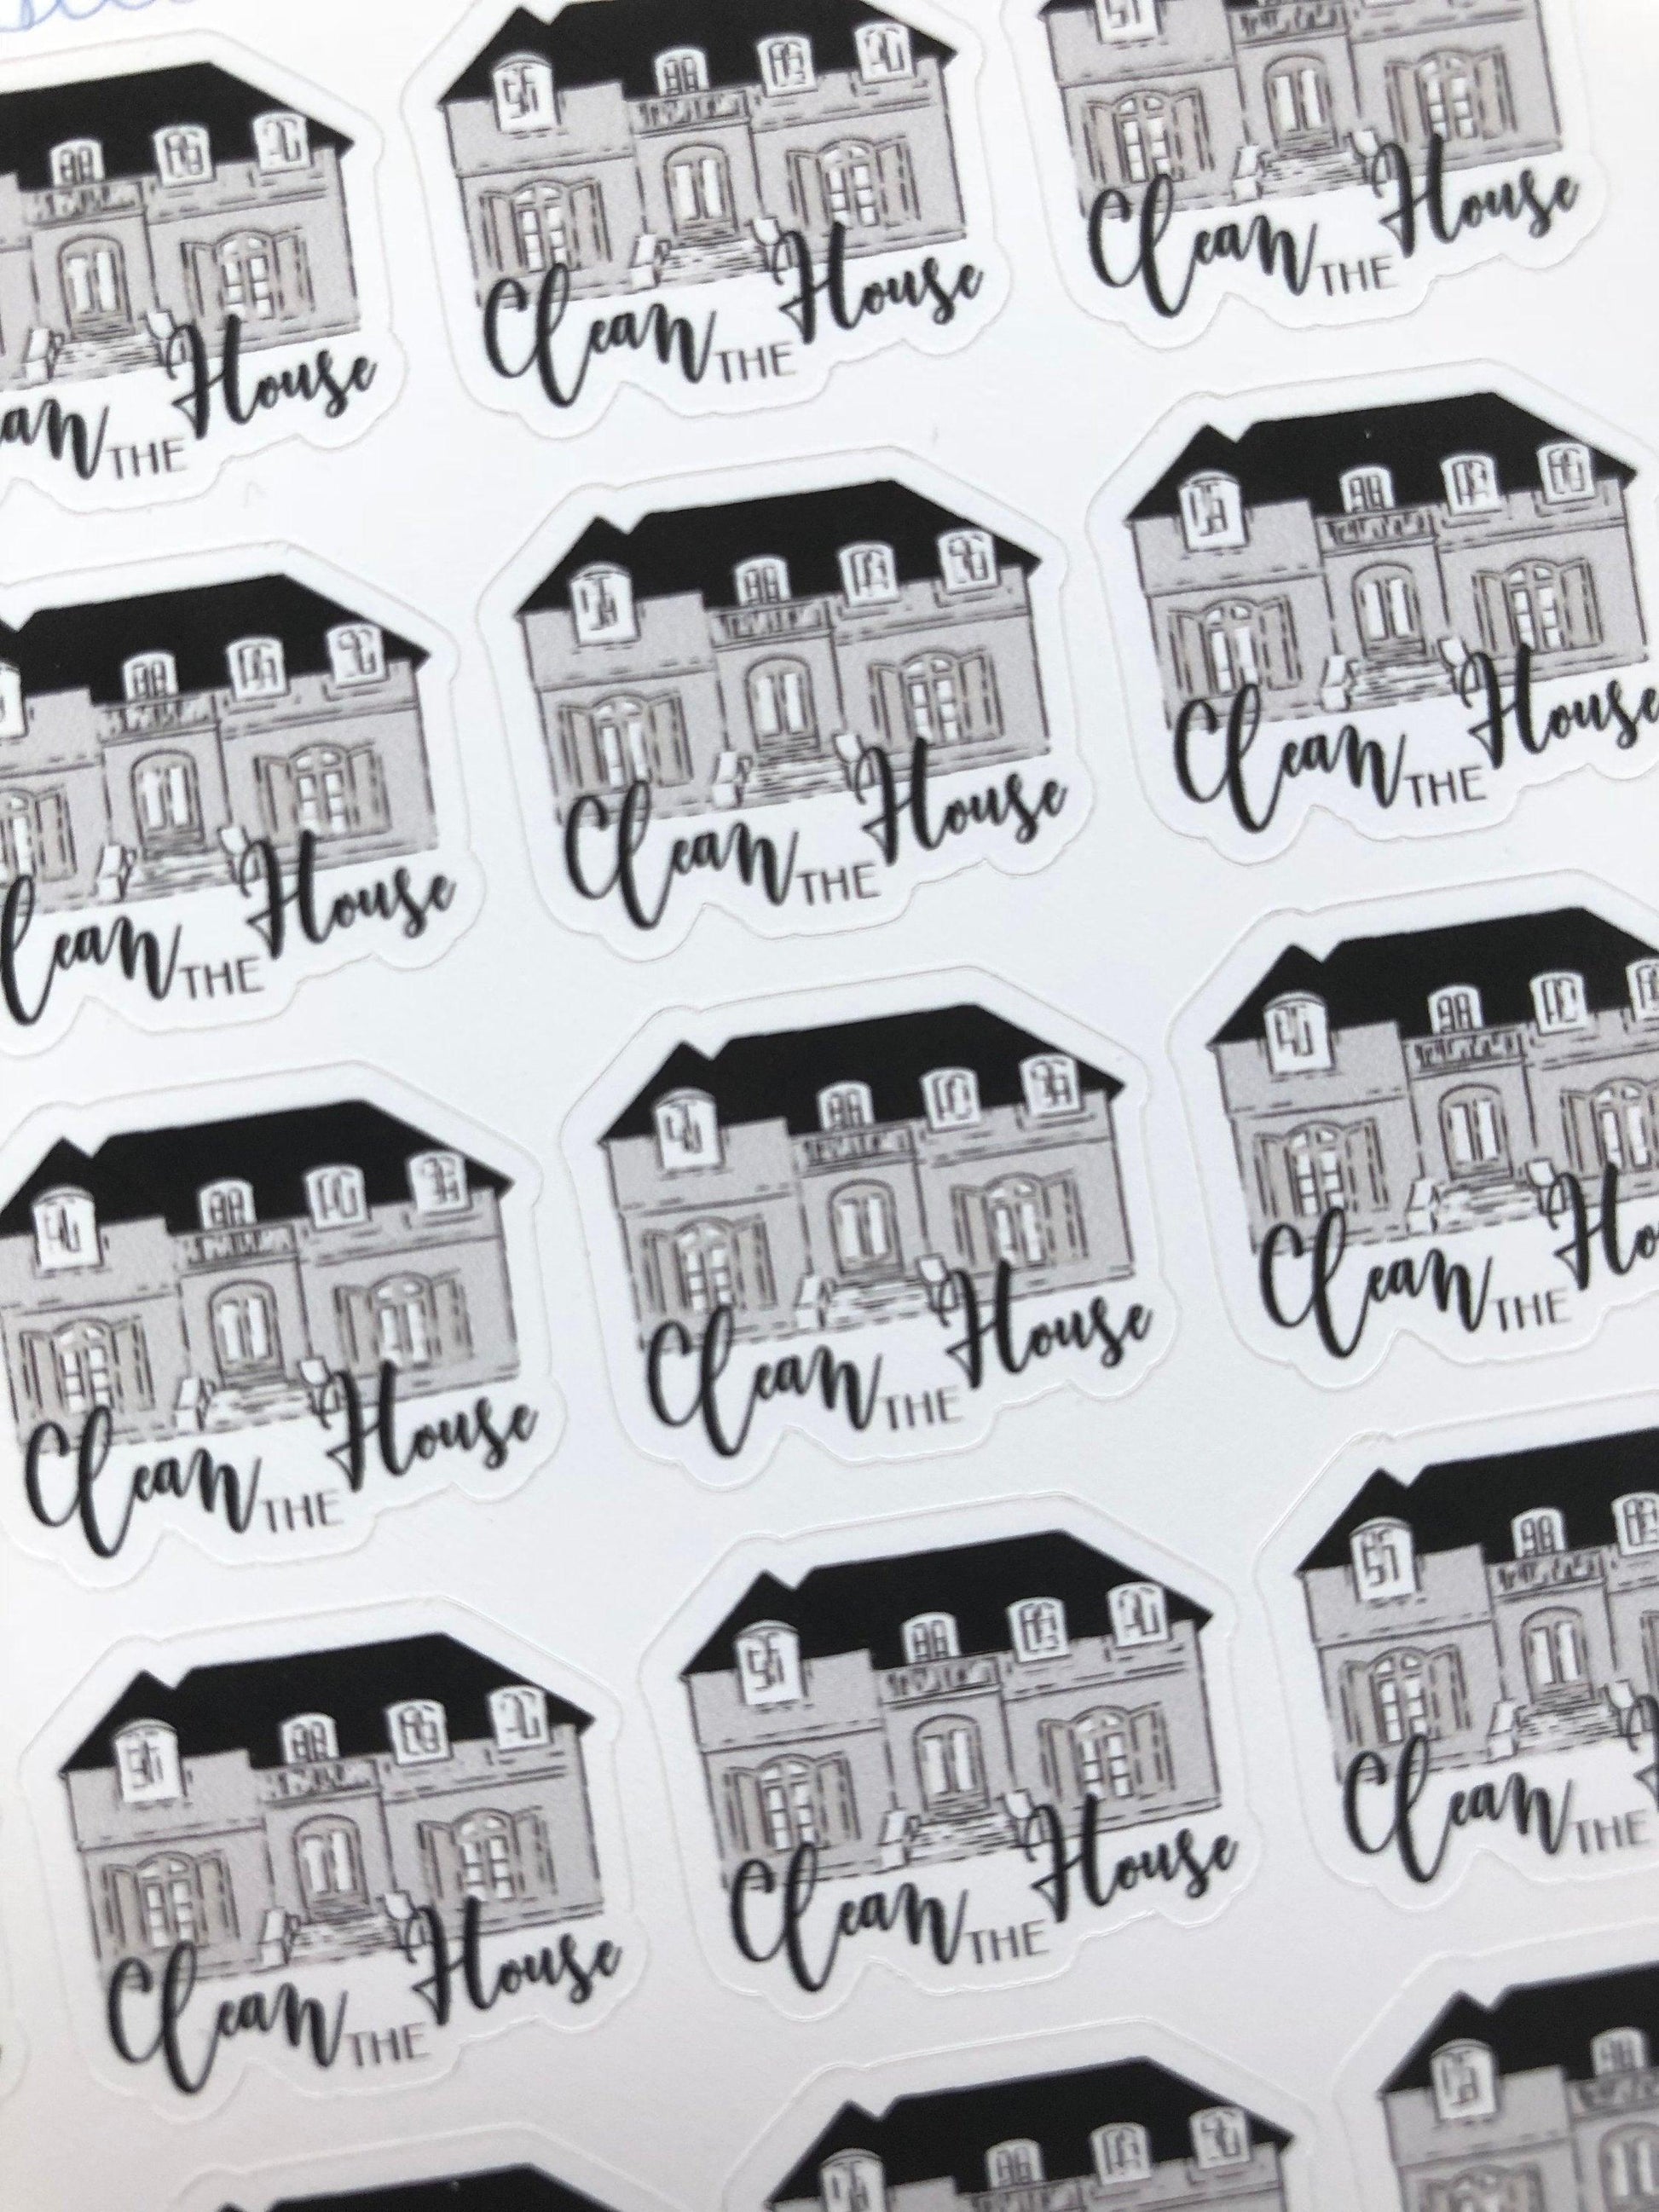 Clean House Script Stickers - oodlemadoodles